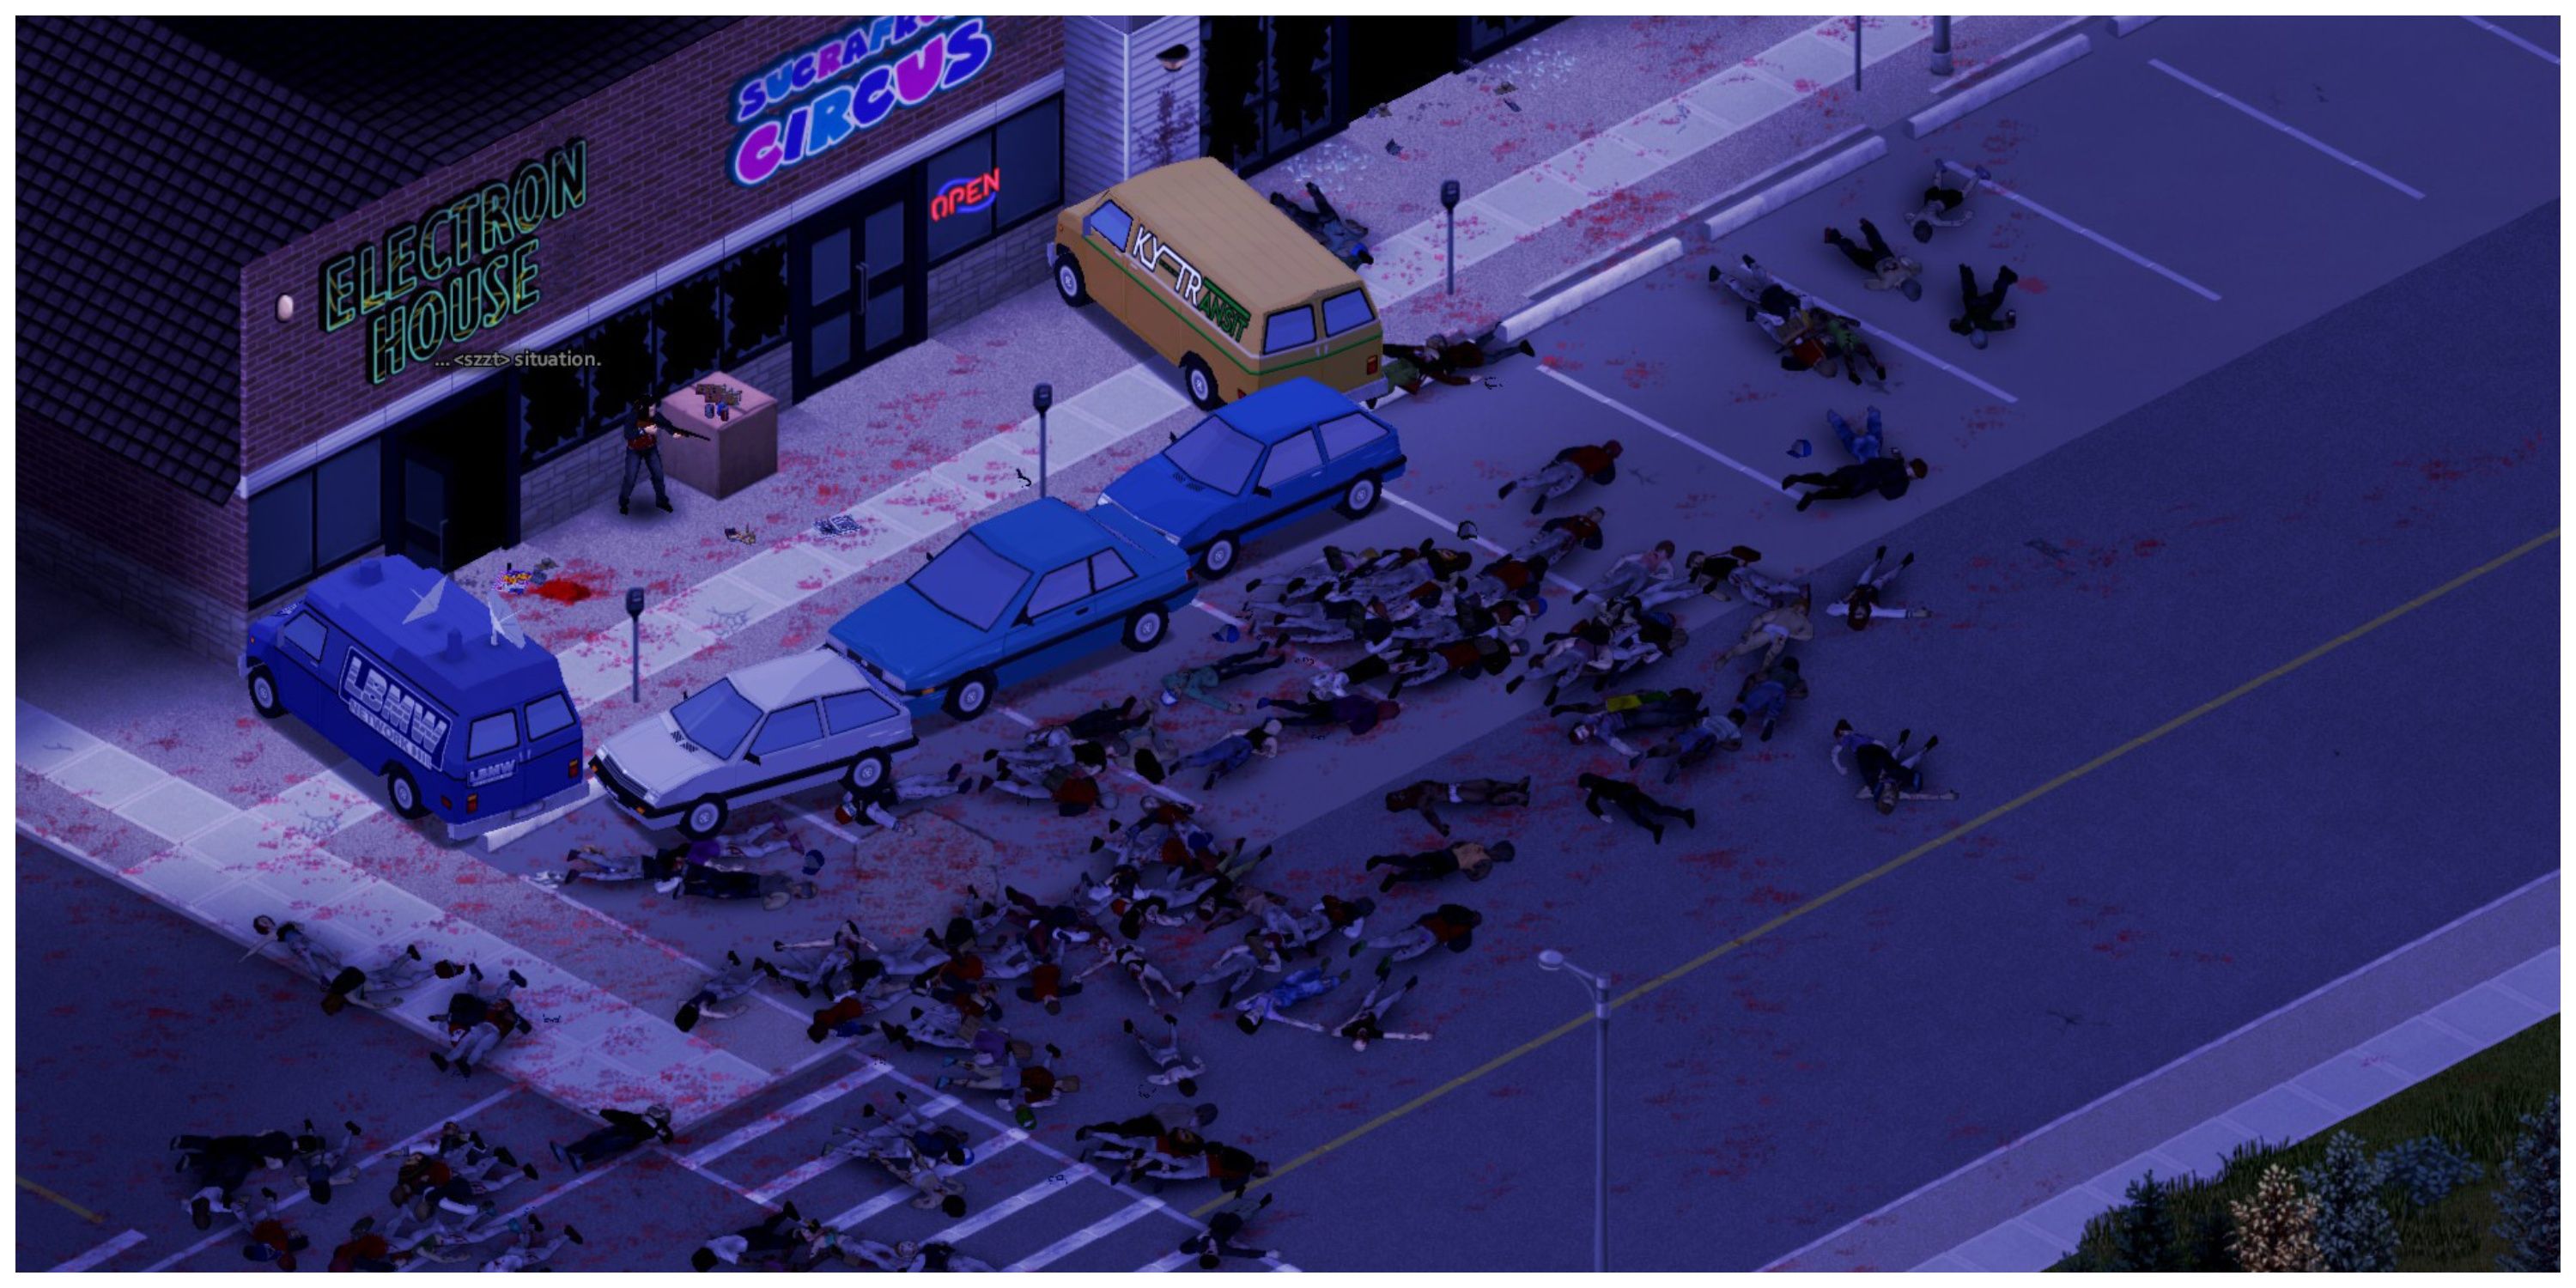 Project Zomboid - Steam Store Page Screenshot (A Car Barricade Surrounded By Dead Zombies)